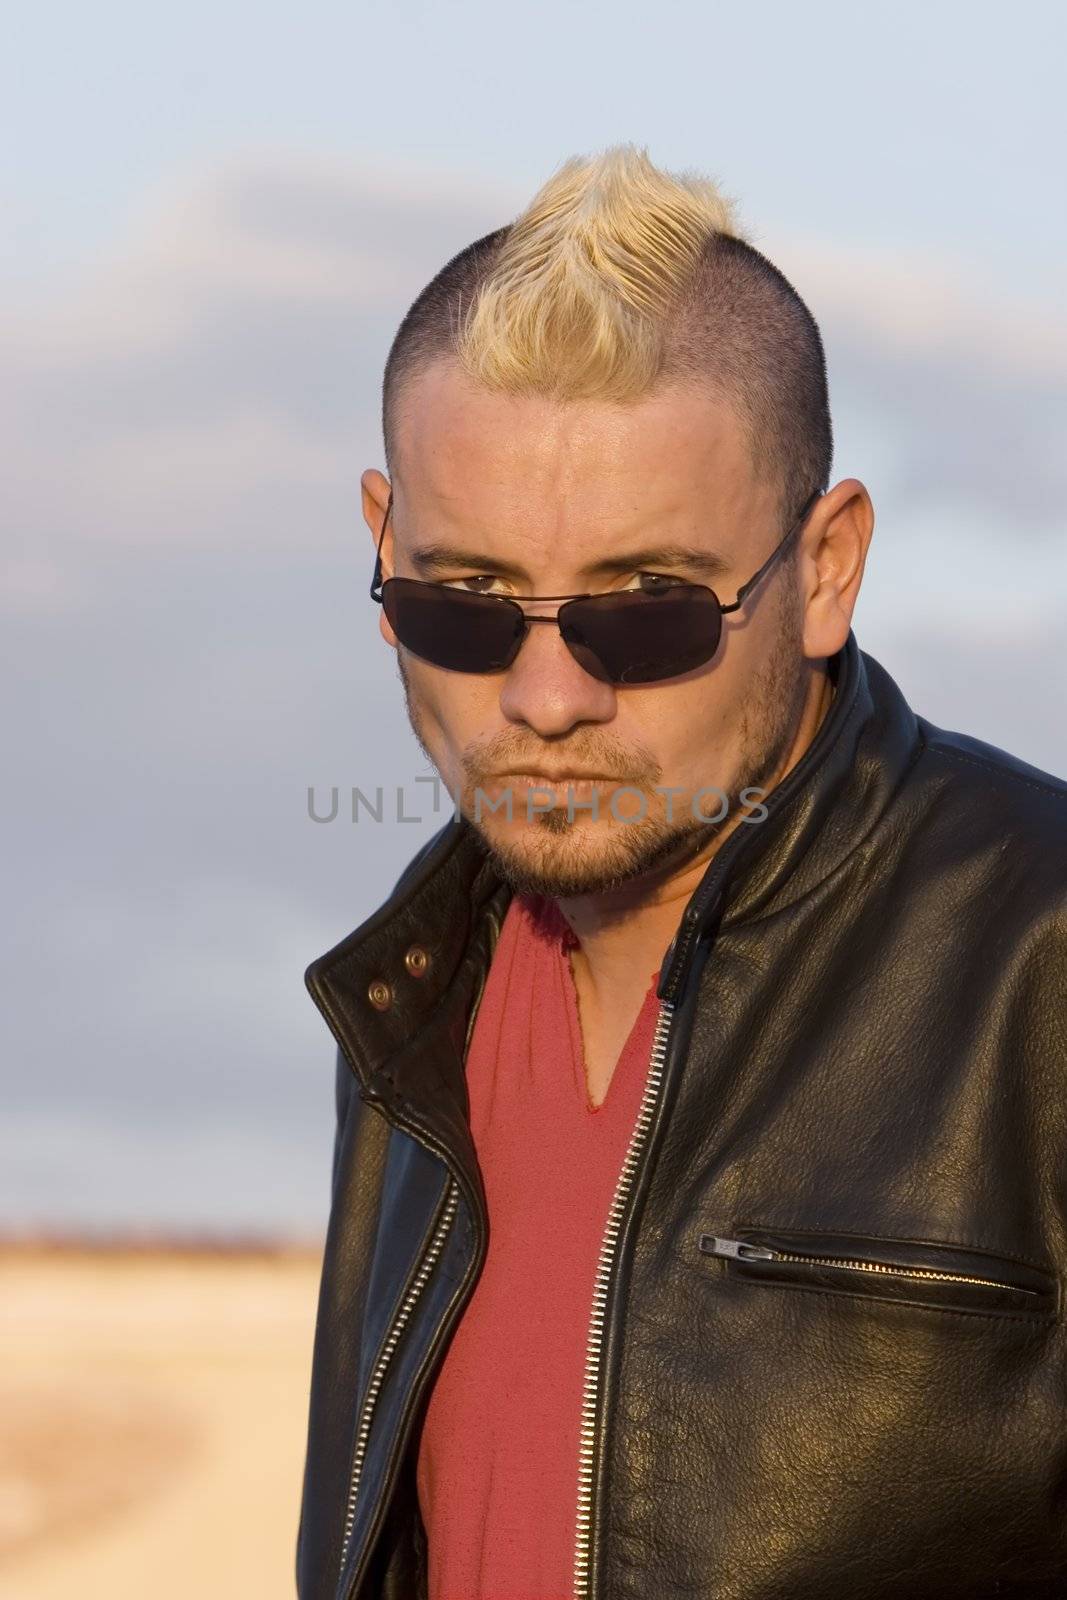 Man with a leather jacket and punk haircut stares at the camera.